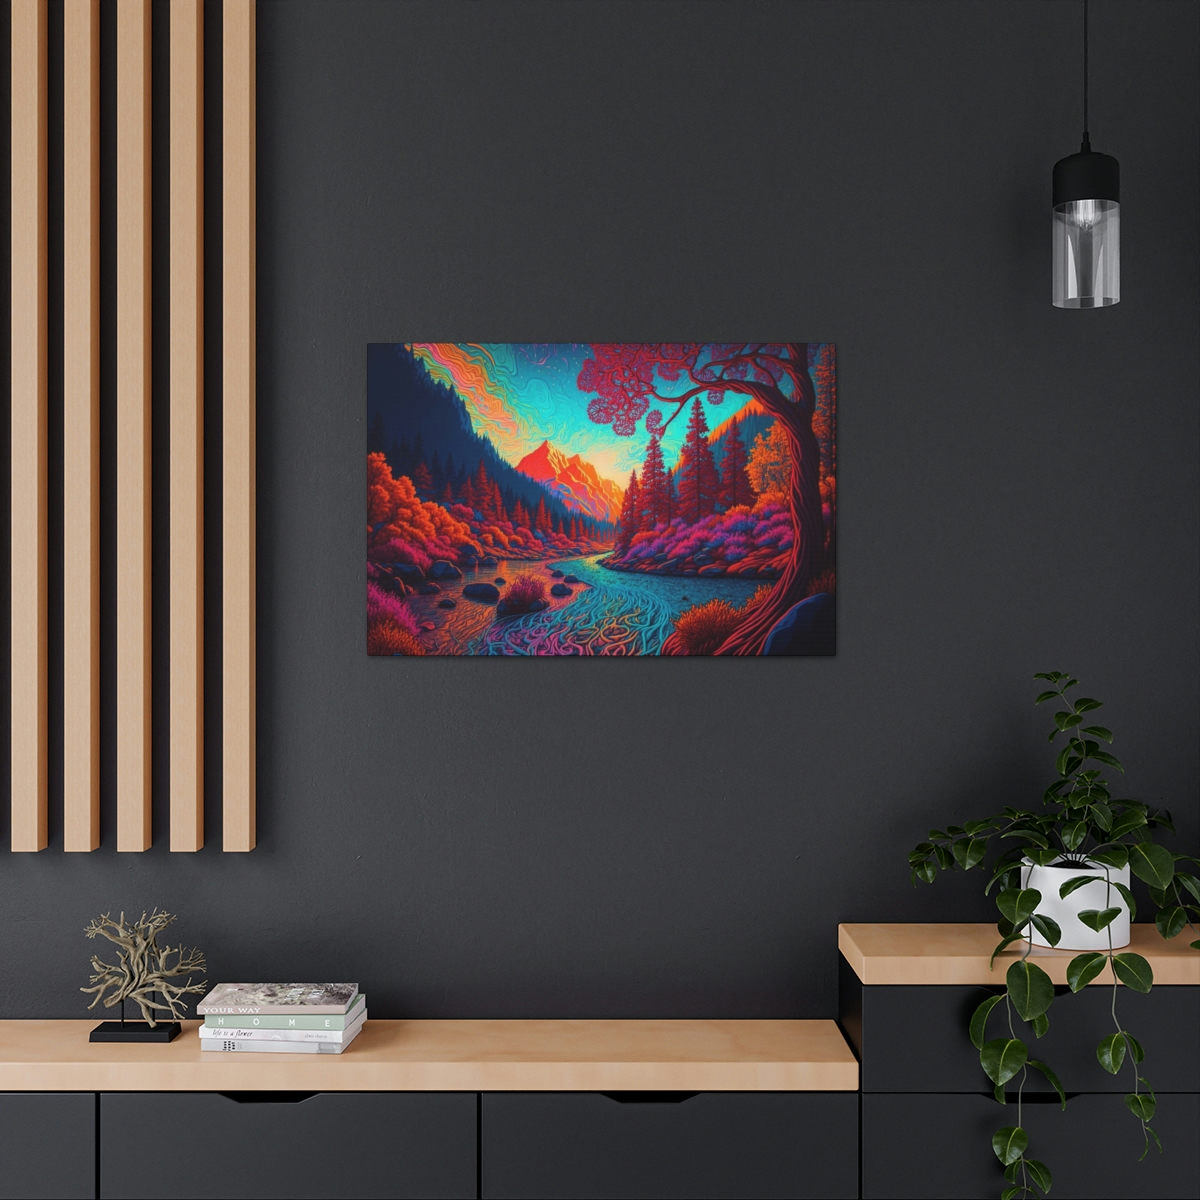 Trippy Art Canvas Print: Go With The Flow